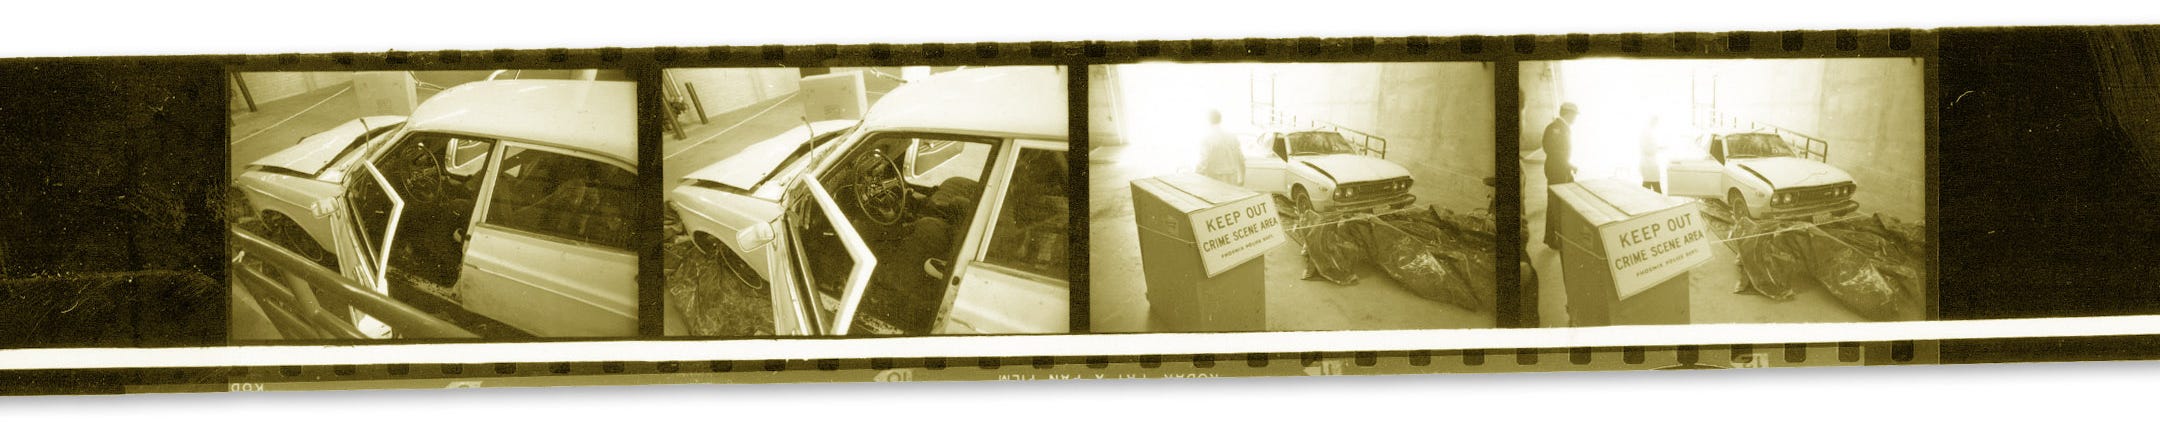 From the archive: A strip of film negatives shows Don Bolles' bombed vehicle.